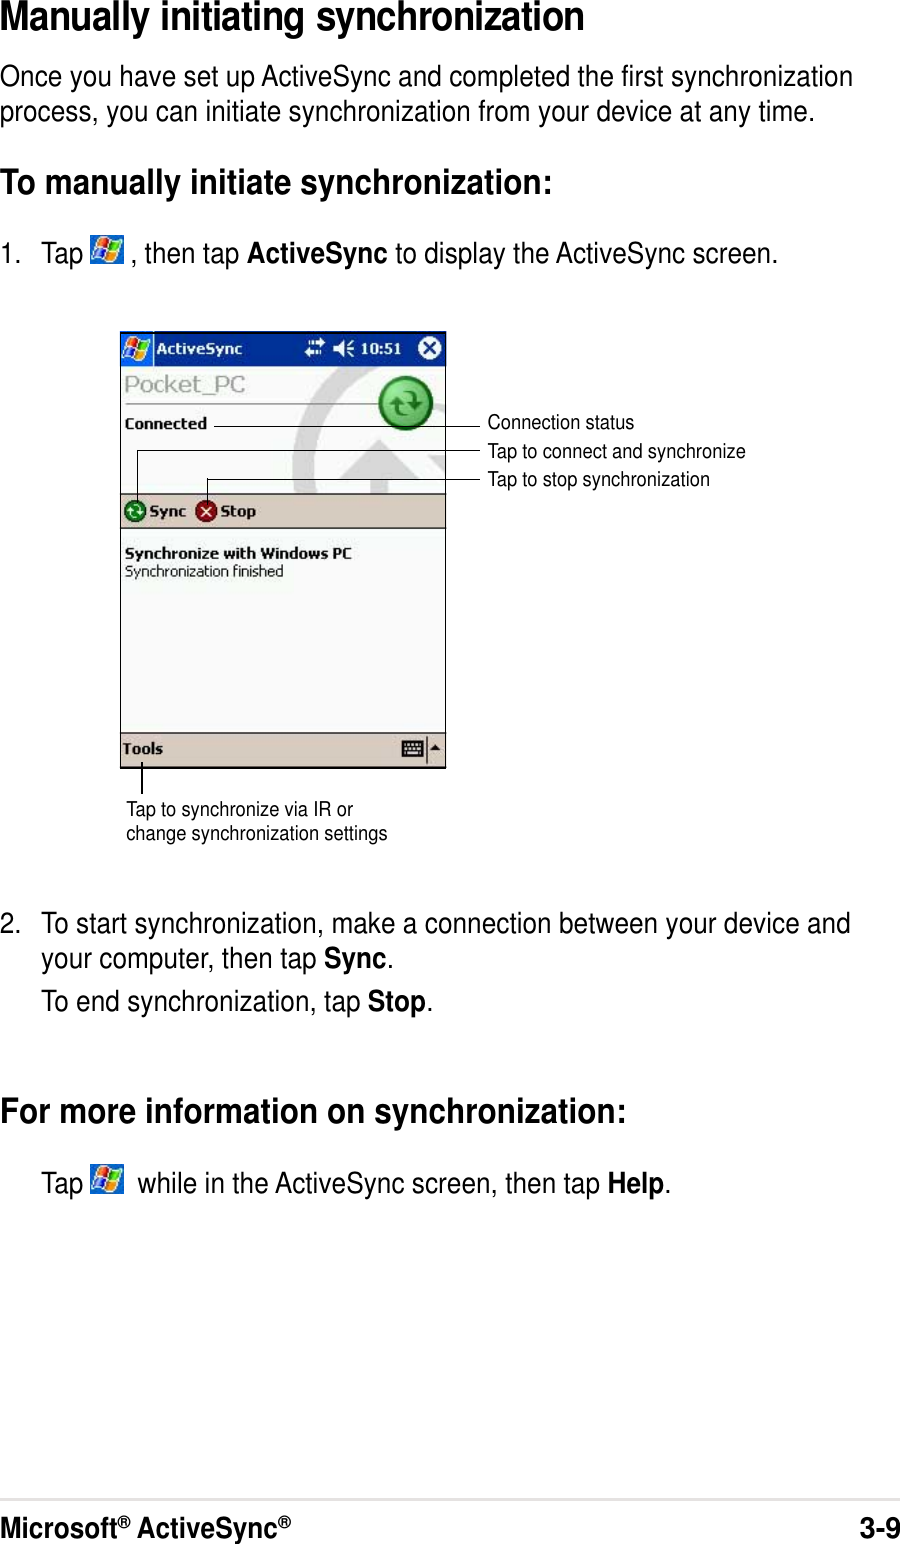 Microsoft® ActiveSync®3-9Manually initiating synchronizationOnce you have set up ActiveSync and completed the first synchronizationprocess, you can initiate synchronization from your device at any time.To manually initiate synchronization:1. Tap   , then tap ActiveSync to display the ActiveSync screen.2. To start synchronization, make a connection between your device andyour computer, then tap Sync.To end synchronization, tap Stop.For more information on synchronization:Tap    while in the ActiveSync screen, then tap Help.Connection statusTap to connect and synchronizeTap to stop synchronizationTap to synchronize via IR orchange synchronization settings